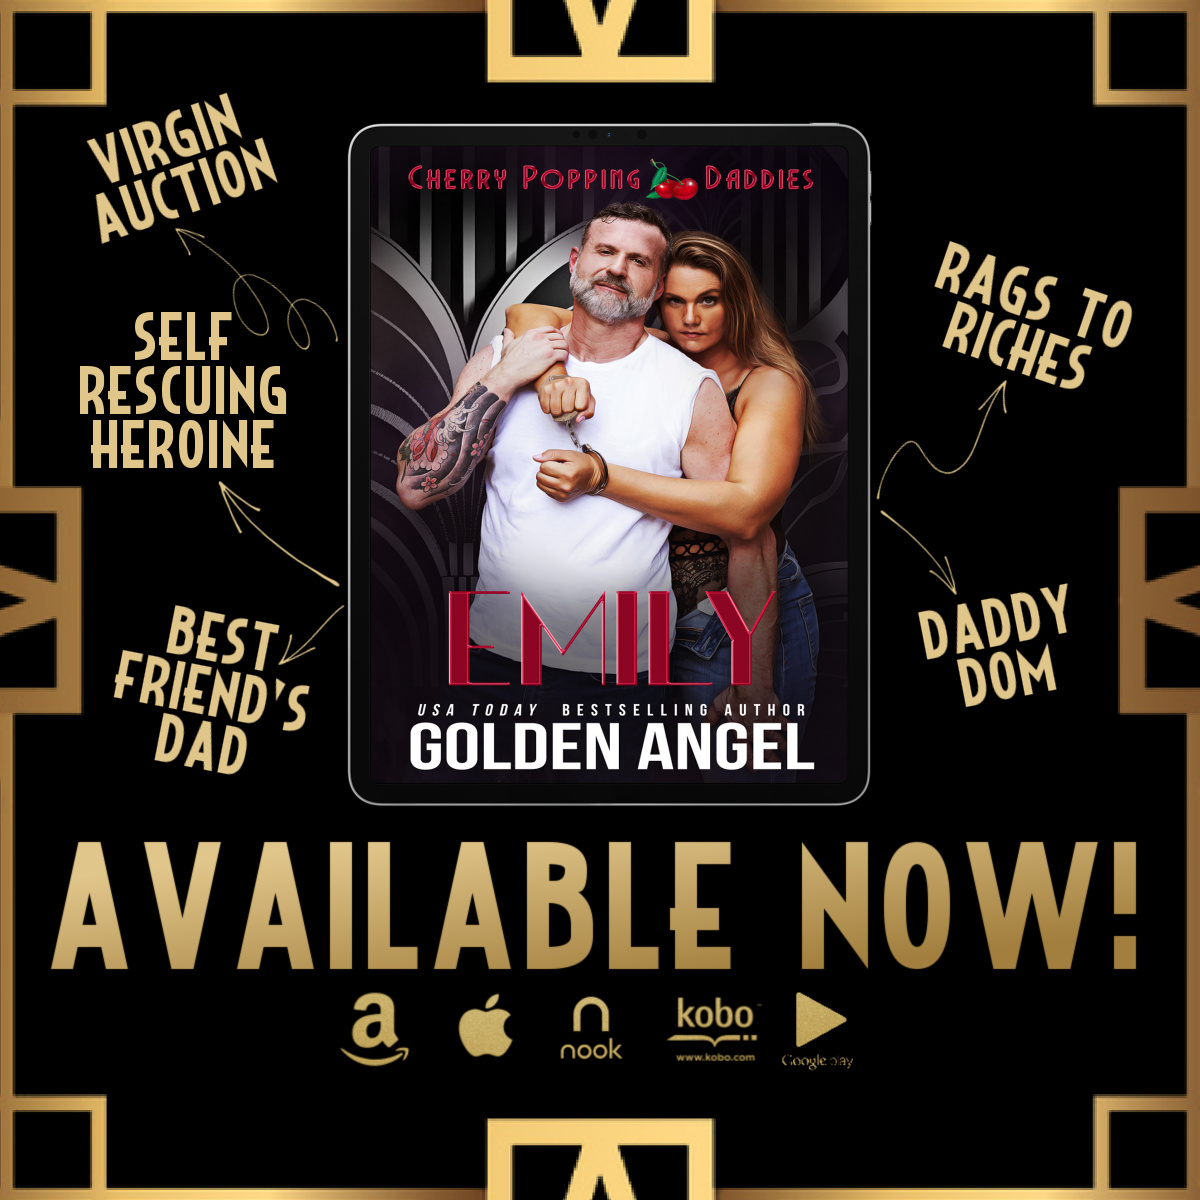 🍒 VIRGIN AUCTION DADDY ROMANCE 🔥 The newest release from @GoldenAngelRom is bringing all the heat. Grab your copy today! geni.us/CPDEmily #releaseboost #emily #cherrypoppindaddies #daddyromance #kinkromance #eroticromance #1852media @1852media @ElleWoodsPR